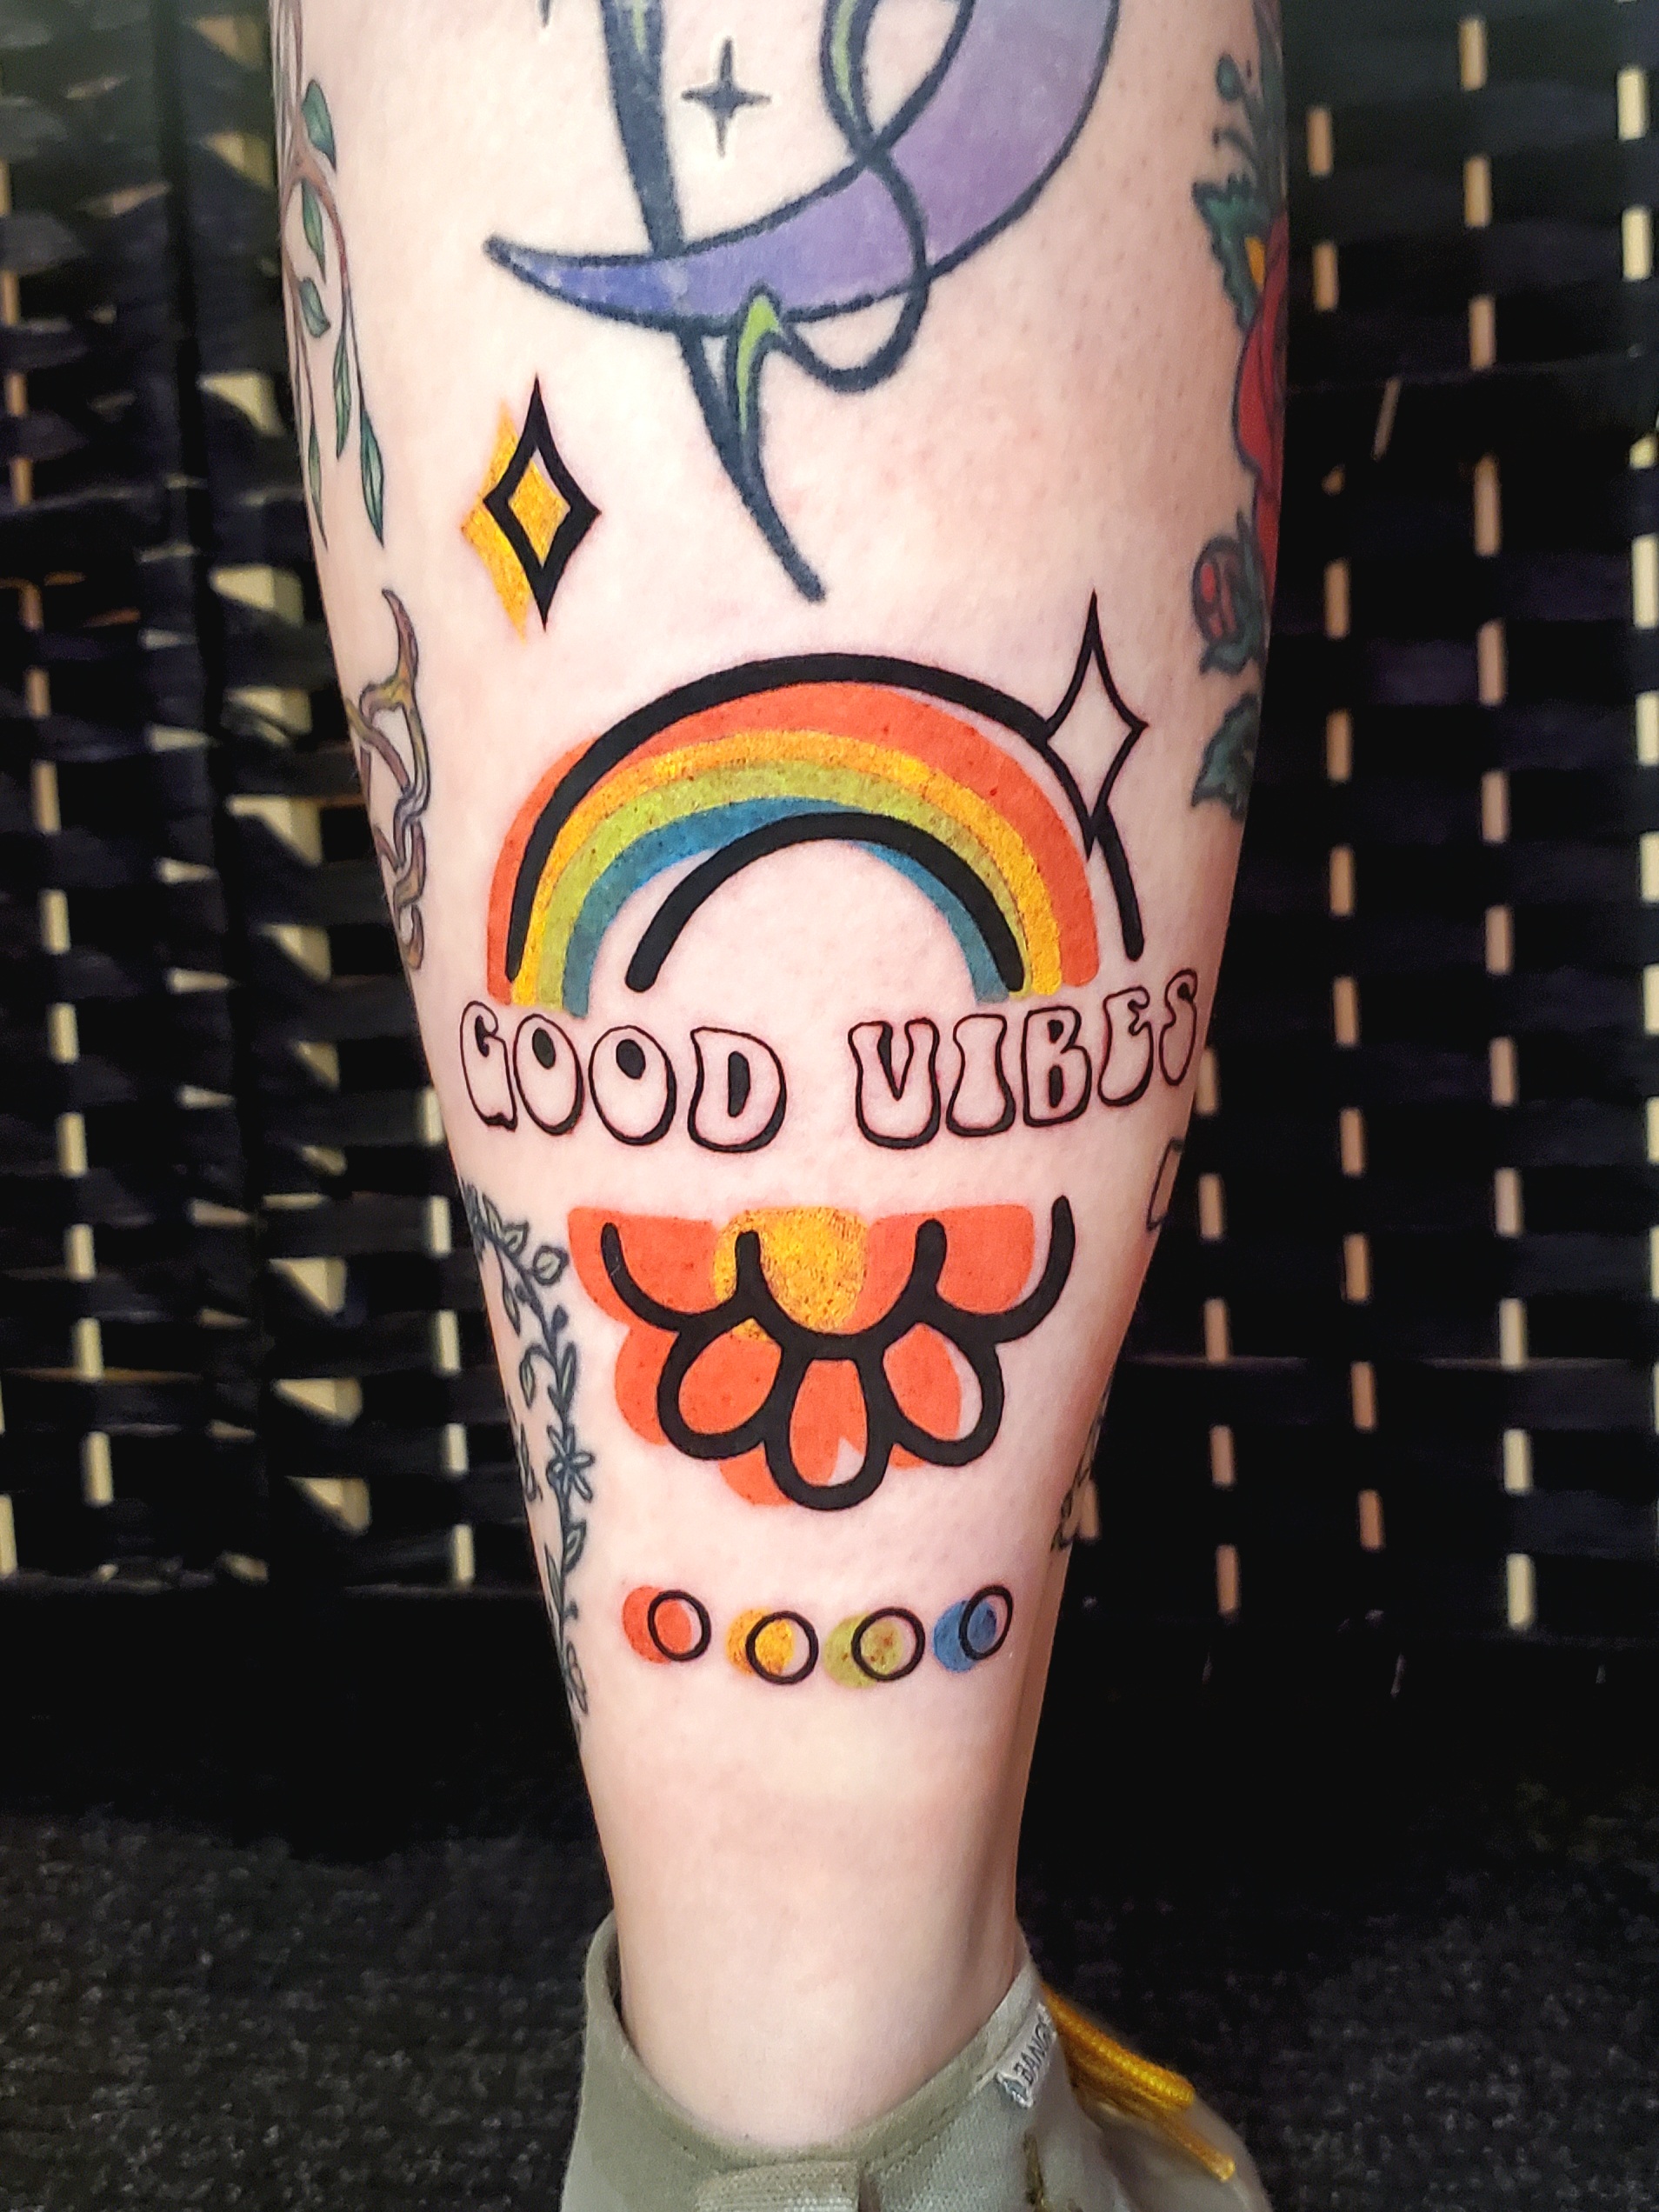 Bongo Crew Tattoo - Good vibes only #goodvibesonly #good #vibes #only  #phrases #inkintheskin #intenzezuperblack #intenzeink #bongocrewtattoo  #bongocrewmx | Facebook